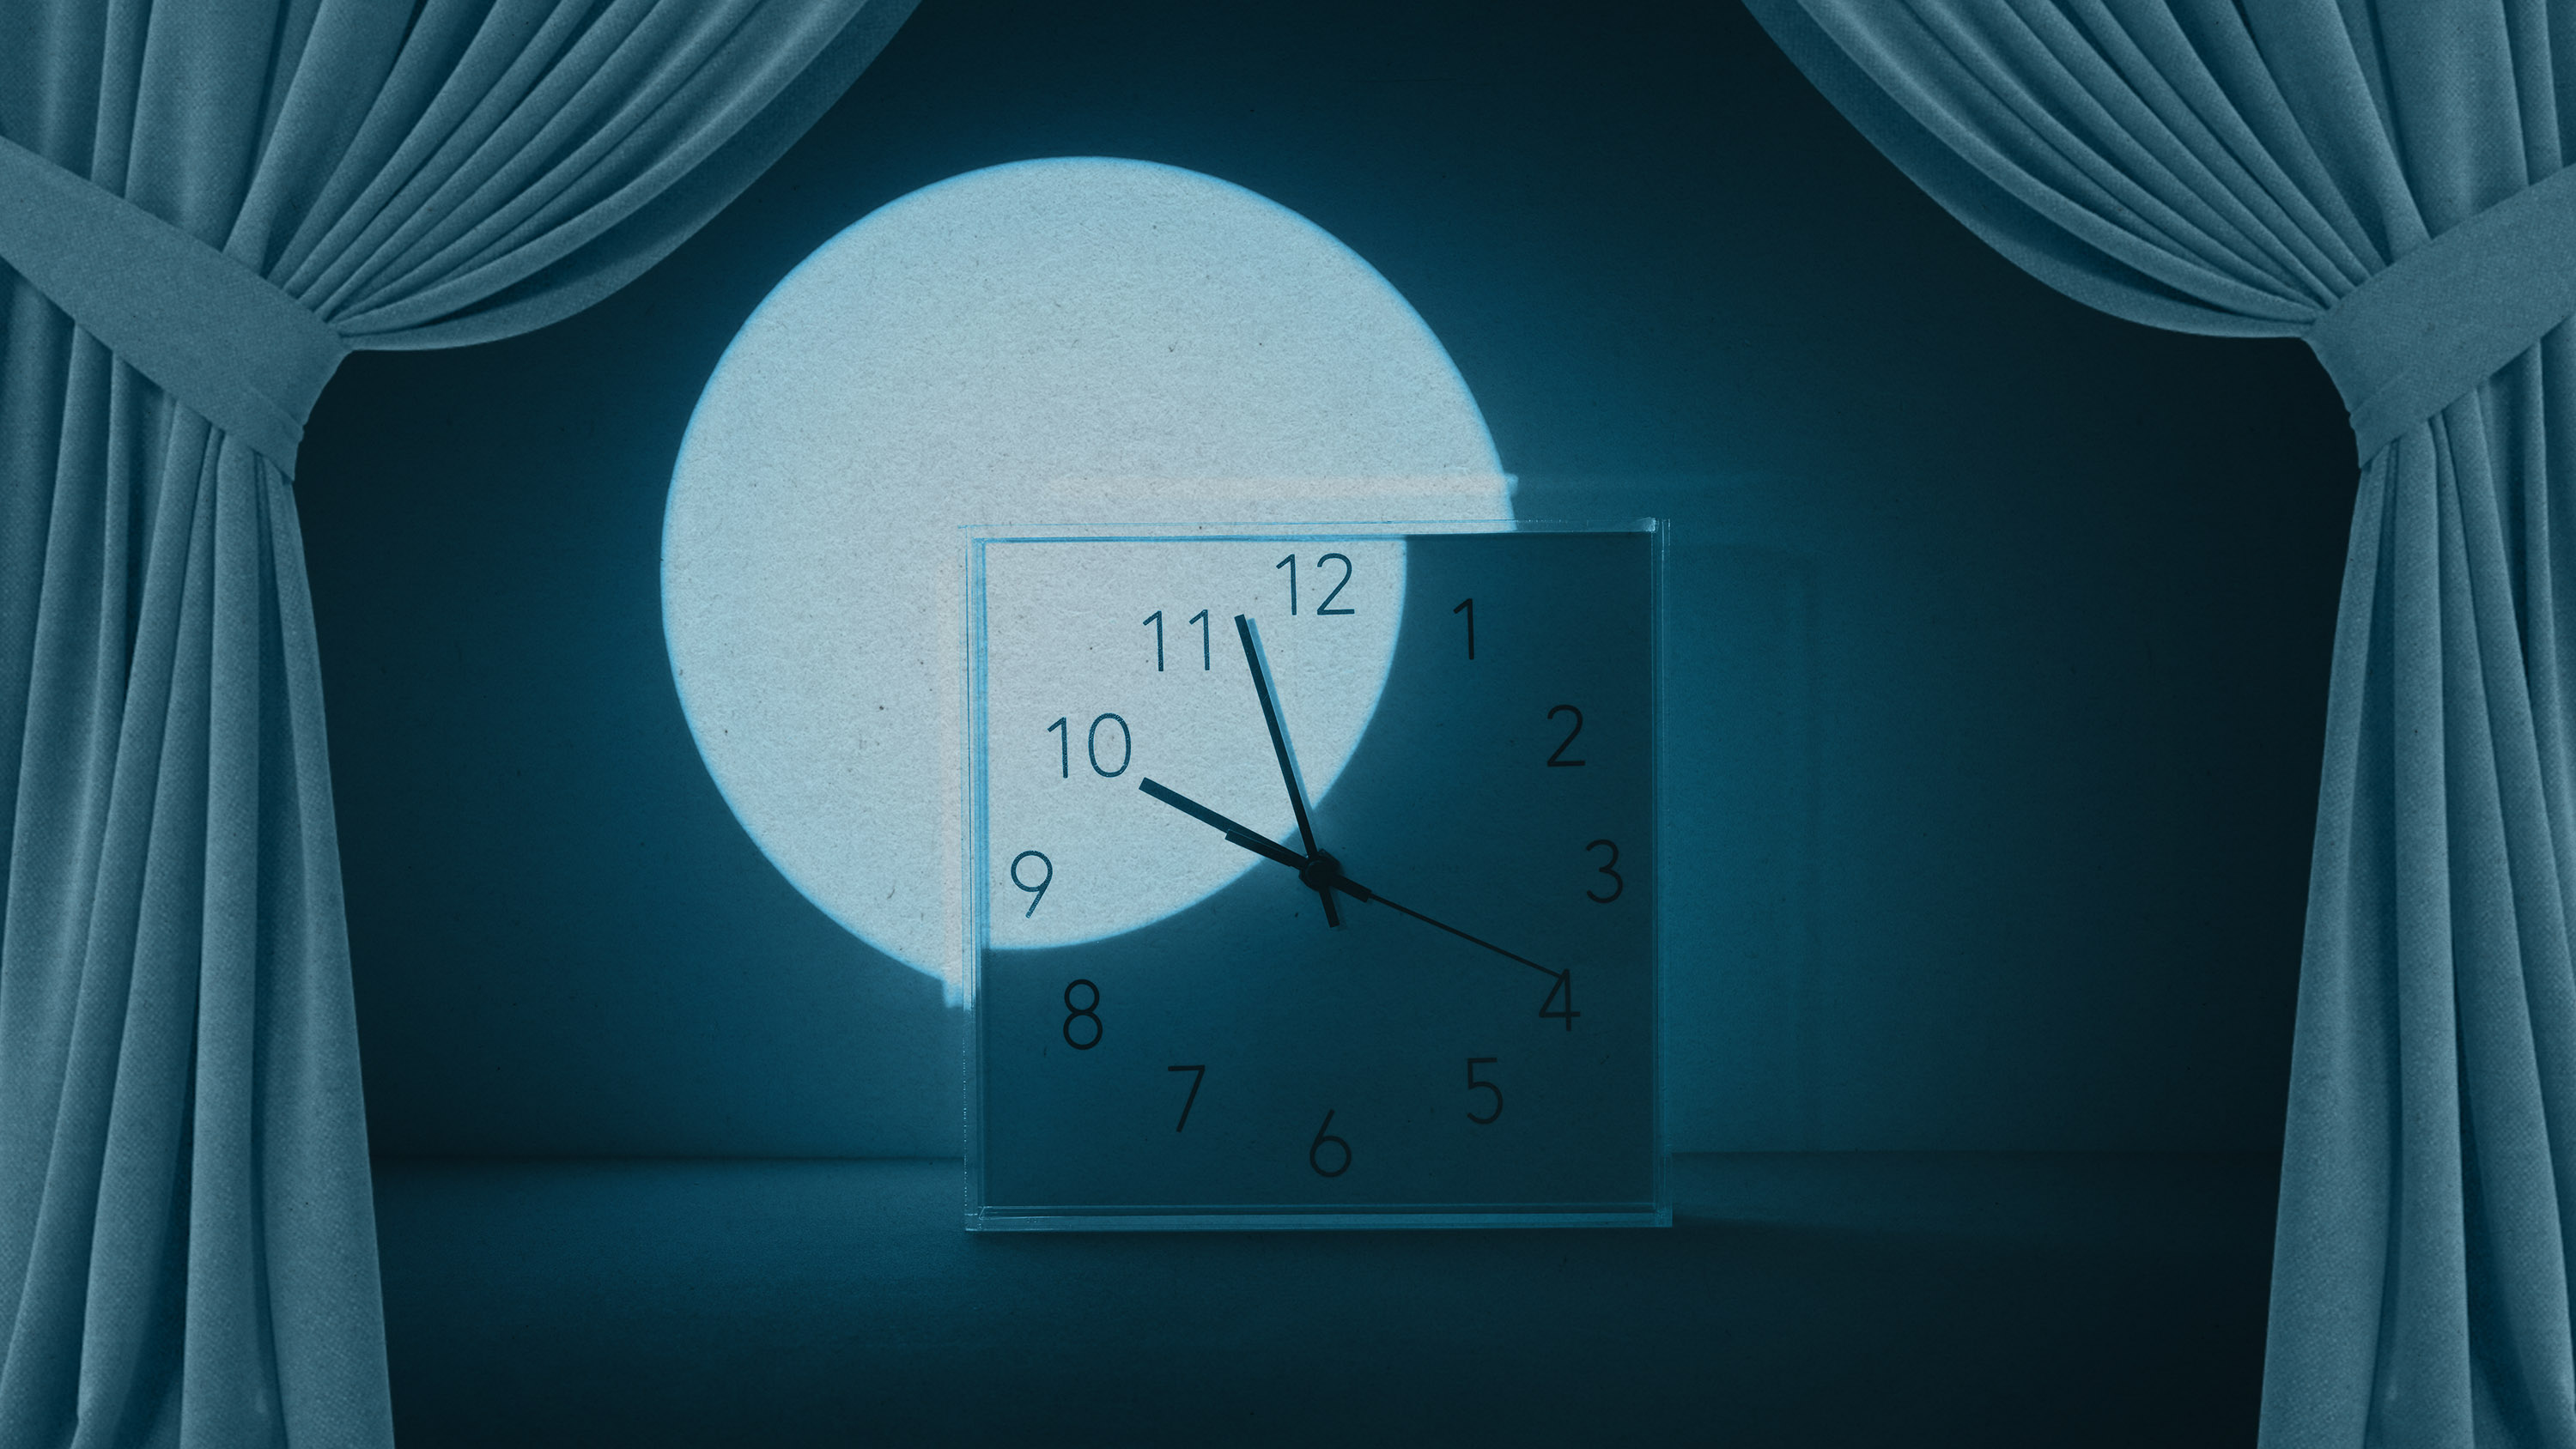 clock with spotlight from the moon, seen through a window treatment